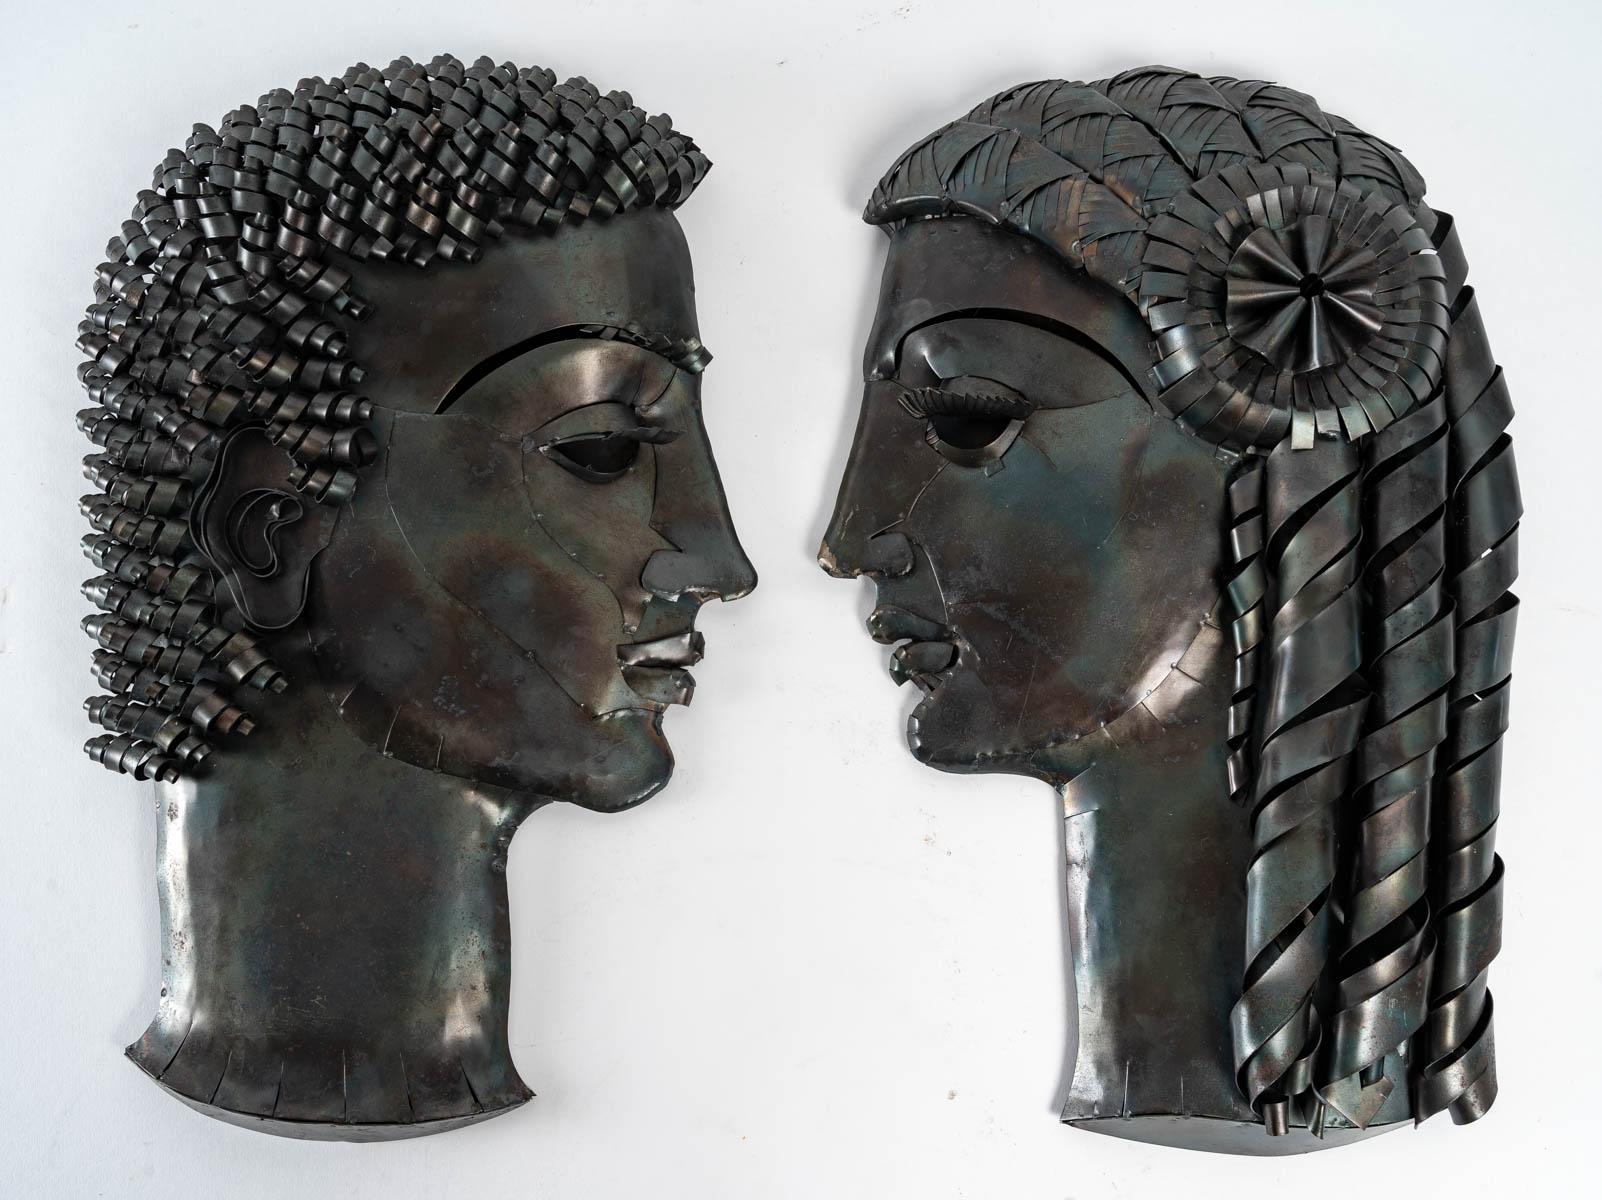 Two patinated sheet metal heads by Léon Masson (1911-1984), circa 1970, Man and Woman, signed and titled on the back.
H: 45 cm, W: 24 cm, D: 15 cm

ref 3171